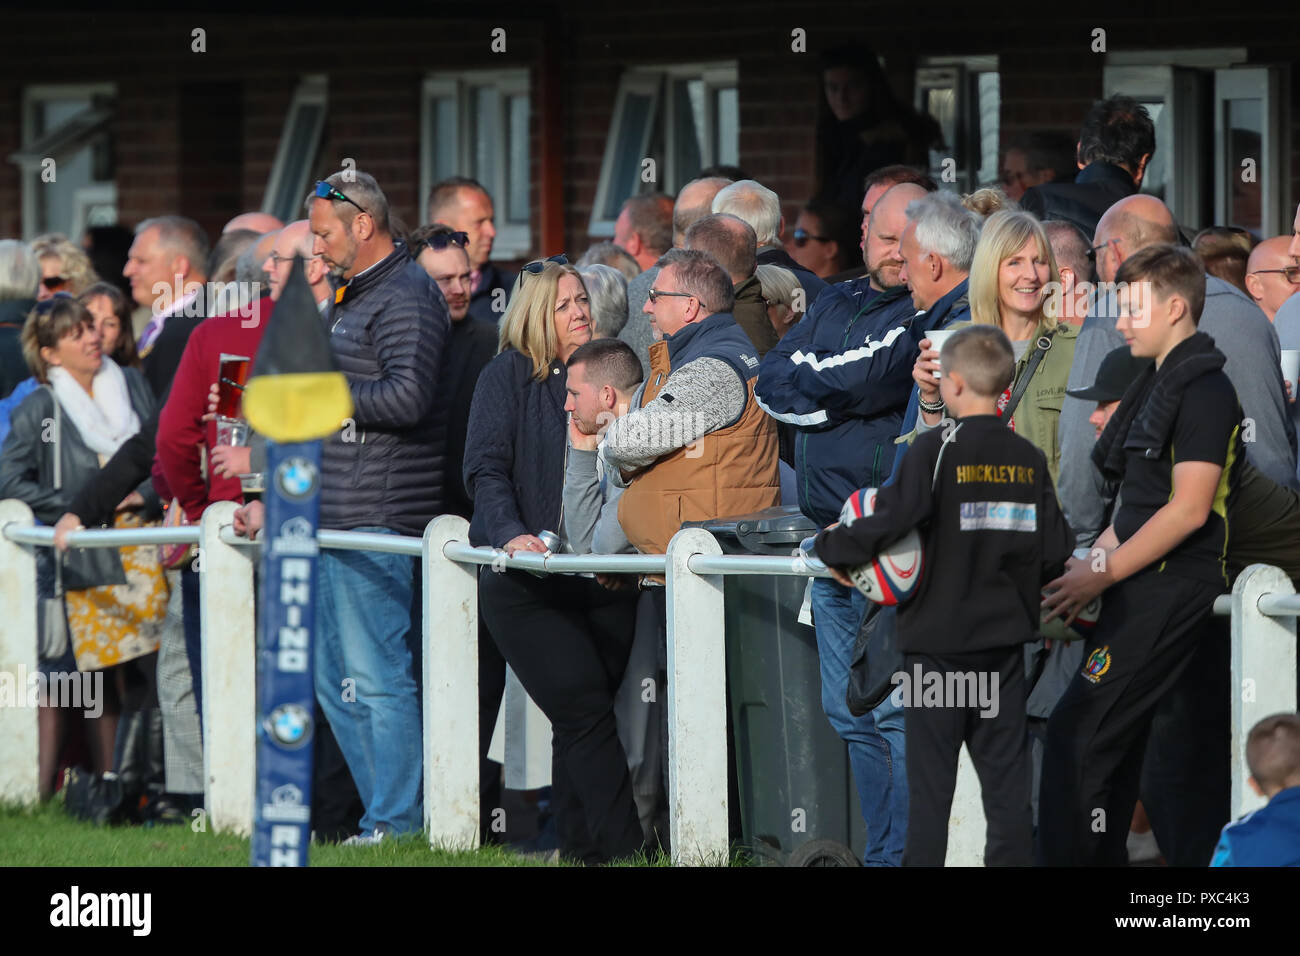 20.10.2018 Hinckley, Leicester, England. Rugby Union, Hinckley rfc v Fylde rfc.  Spectators watch the game outside the main stand during the RFU National League 2 North (NL2N) game played at the Leicester  Road Stadium.    © Phil Hutchinson / Alamy Live News Stock Photo